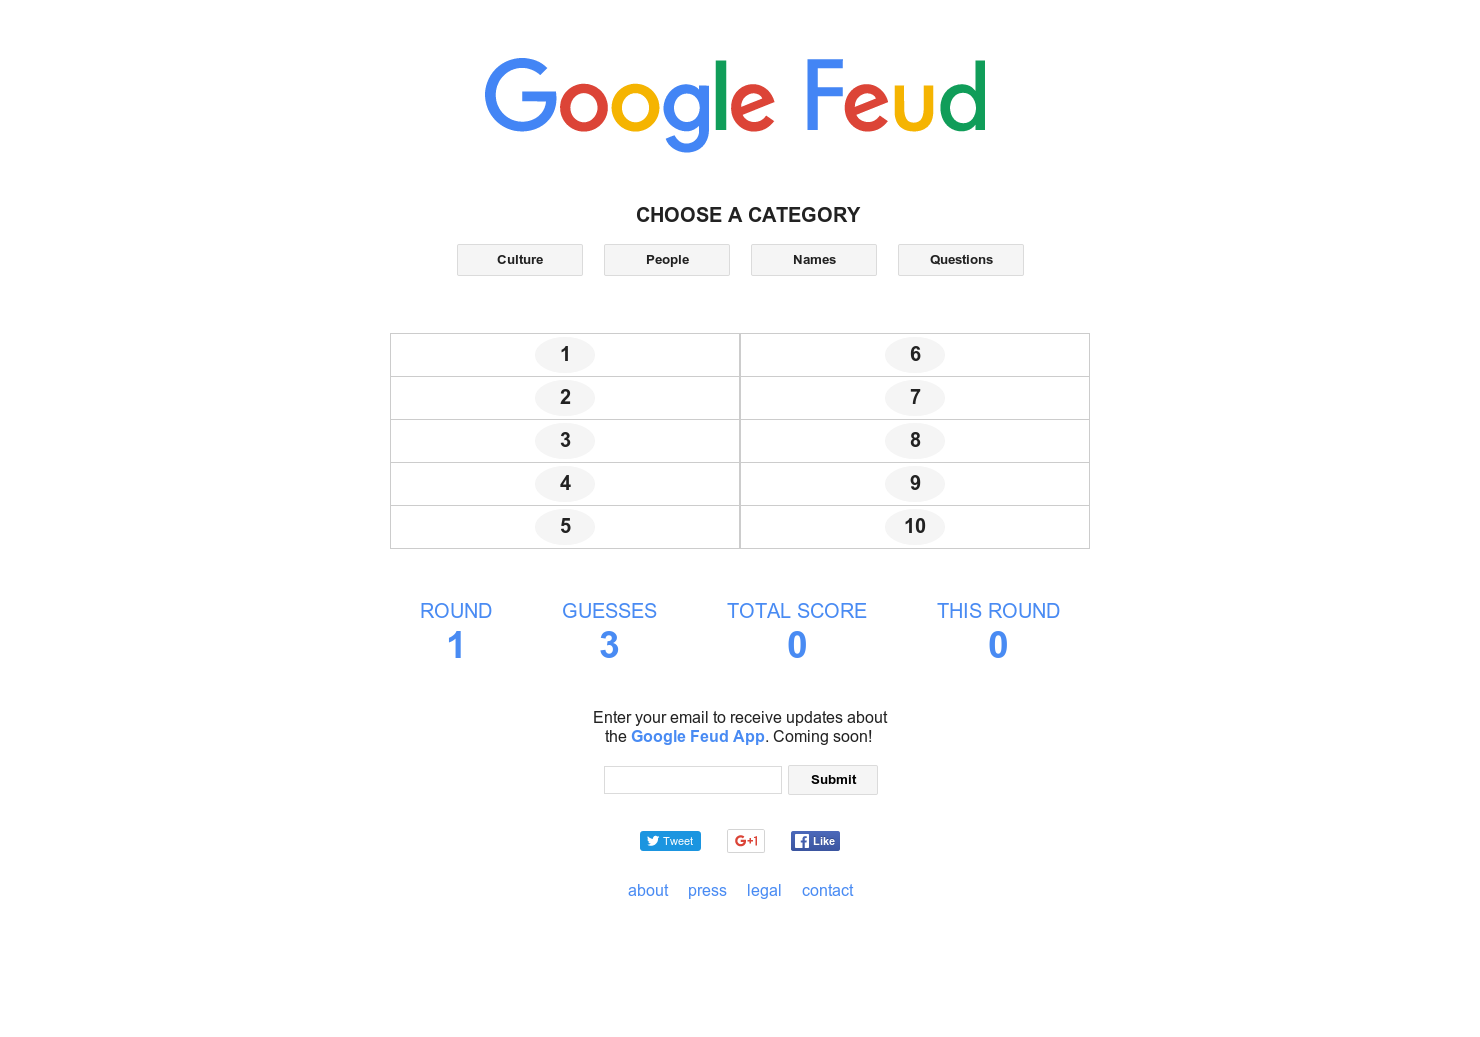 Google Feud is Family Feud with Google autocomplete